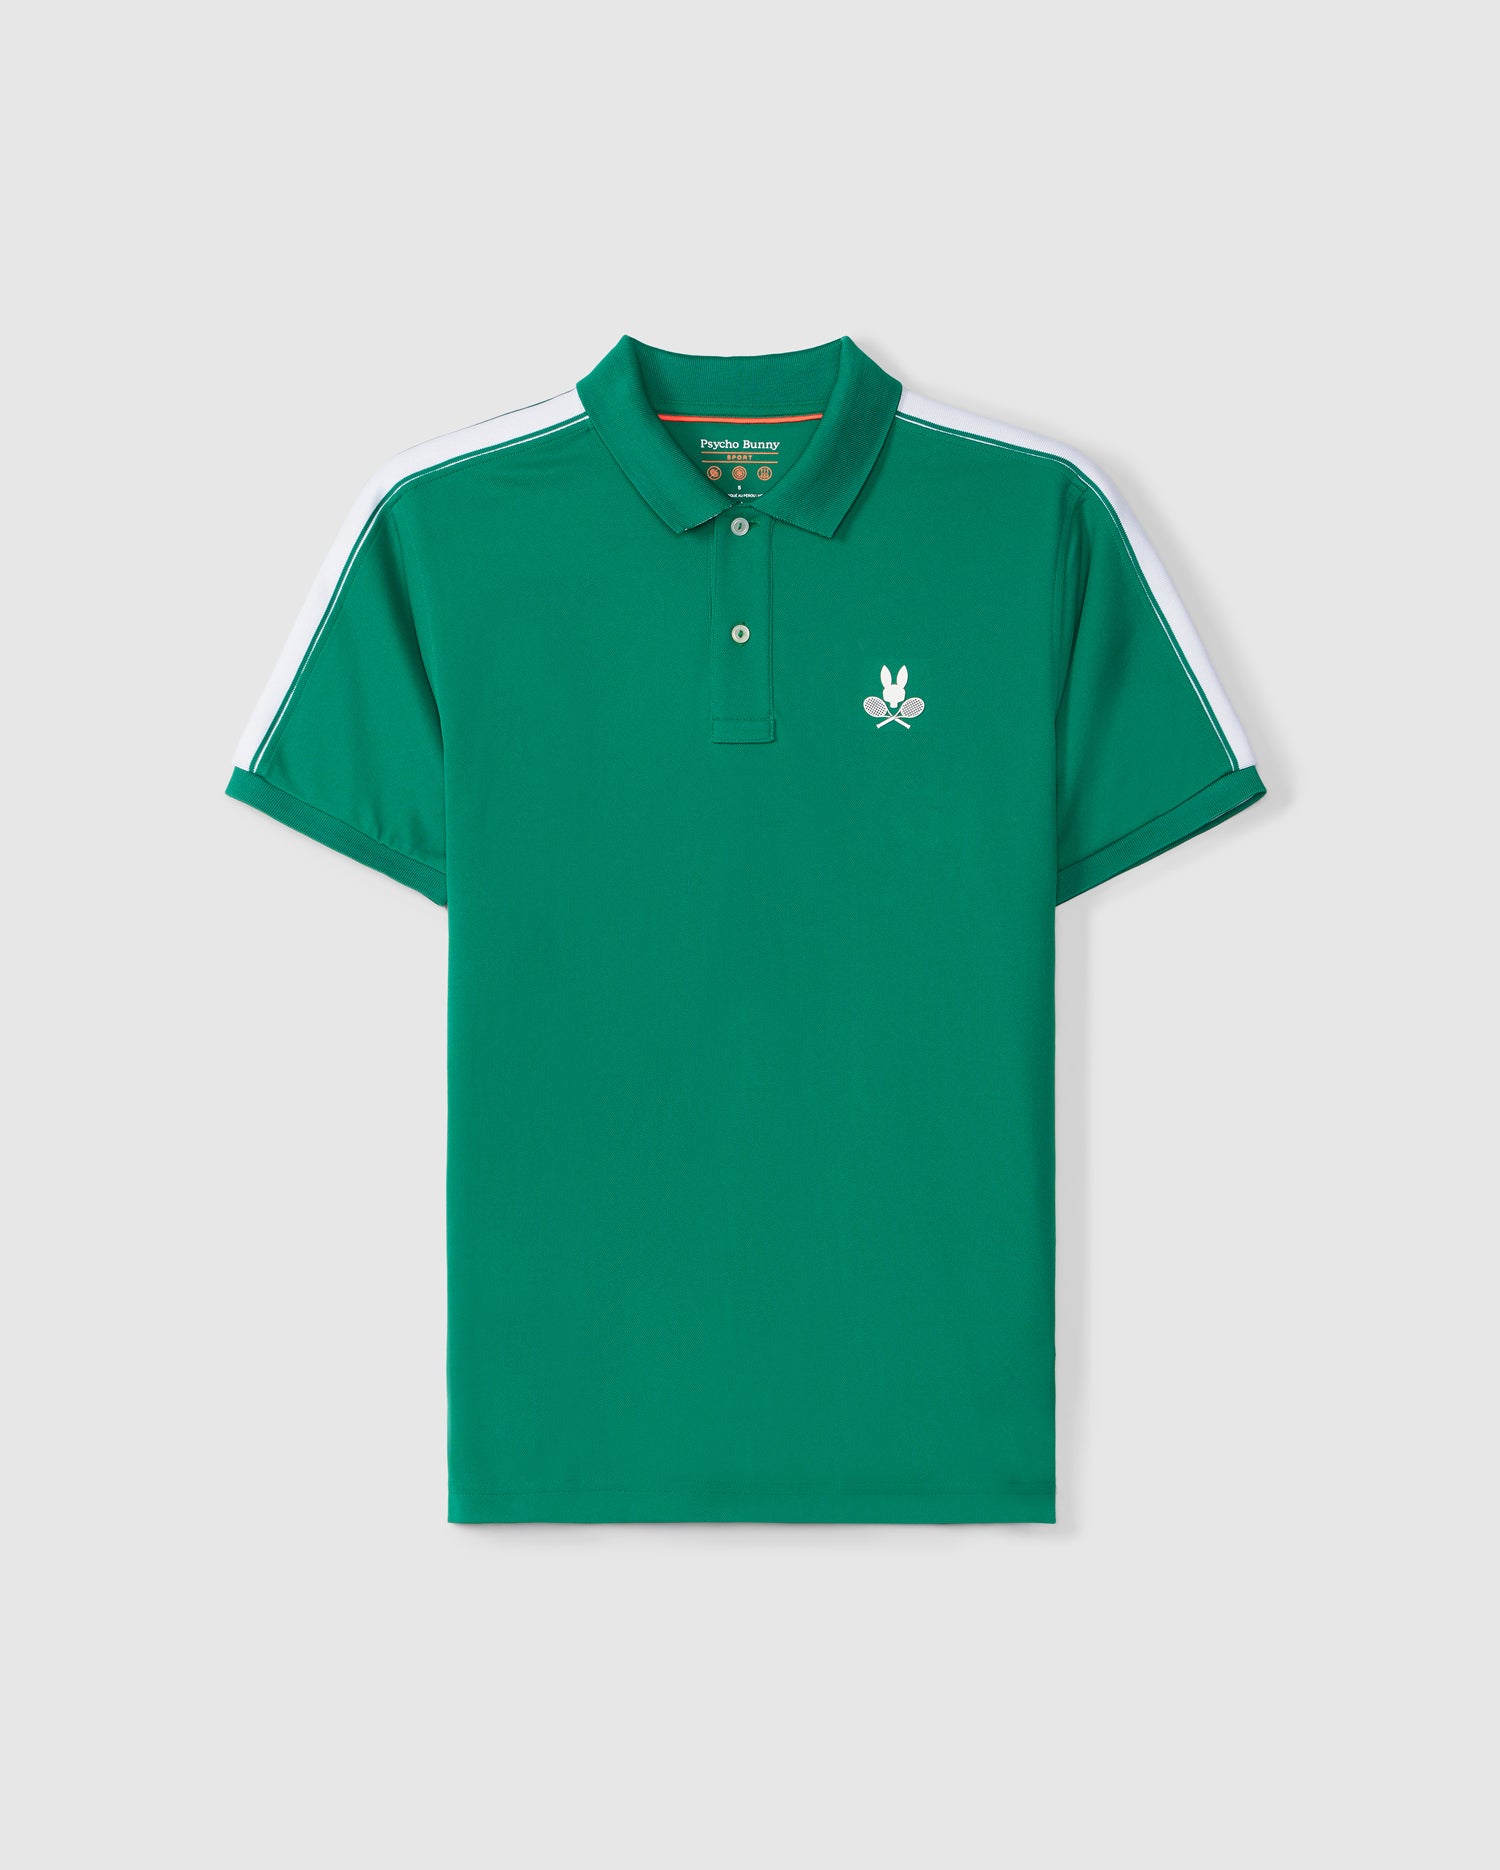 A MENS COURTSIDE SPORT POLO - B6K693C200 by Psycho Bunny made from 100% polyester, with white stripes on the shoulders and sleeves. It features a white embroidered Bunny logo of a character with crossed rackets on the left chest. The shirt has a button-up collar and short sleeves.